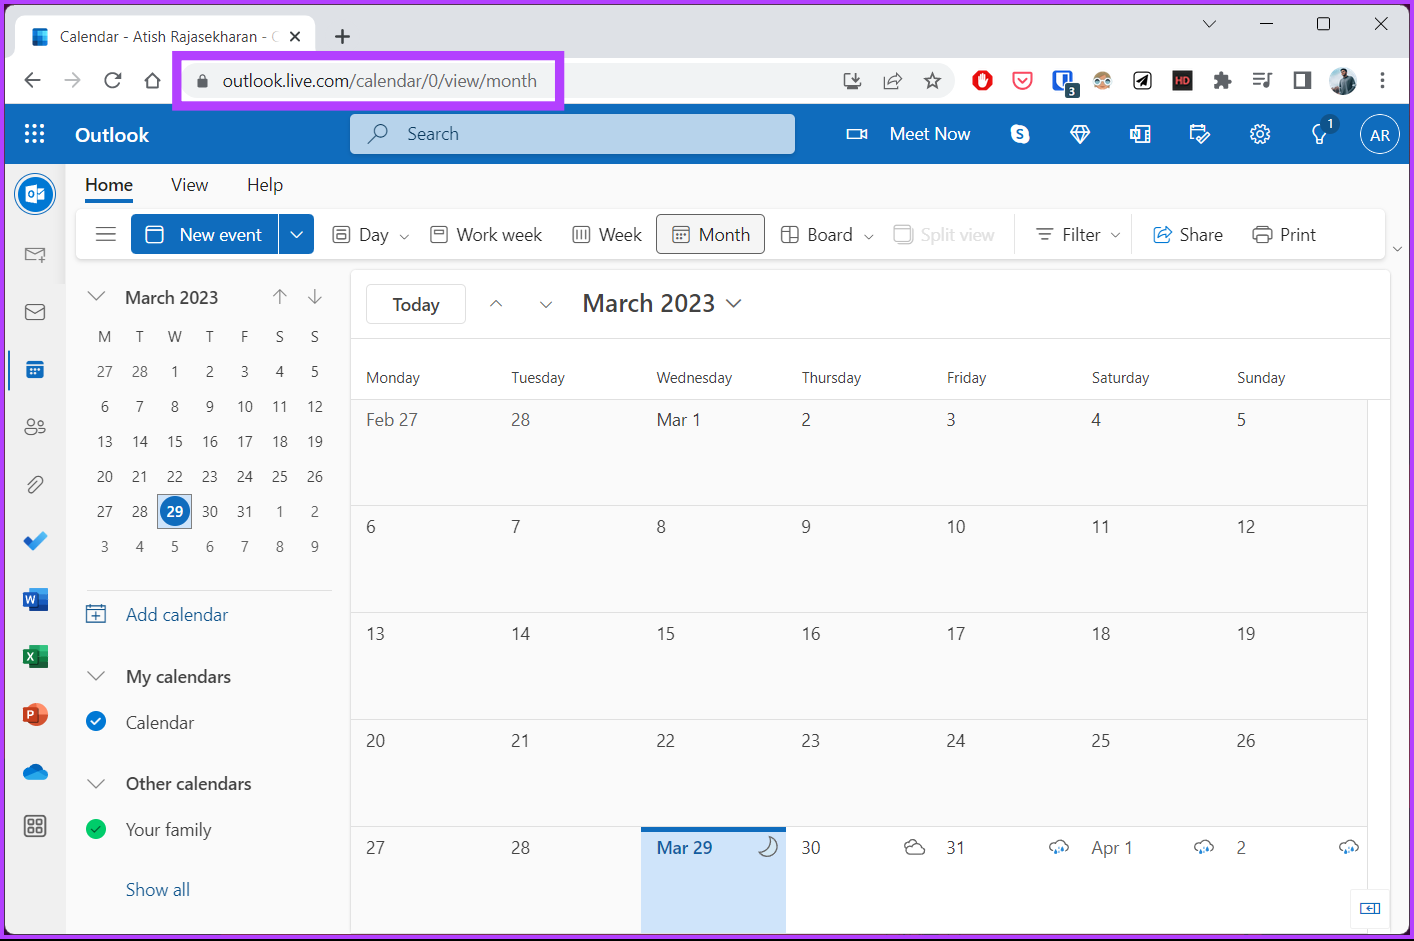 Go to Outlook Calendar from your preferred browser